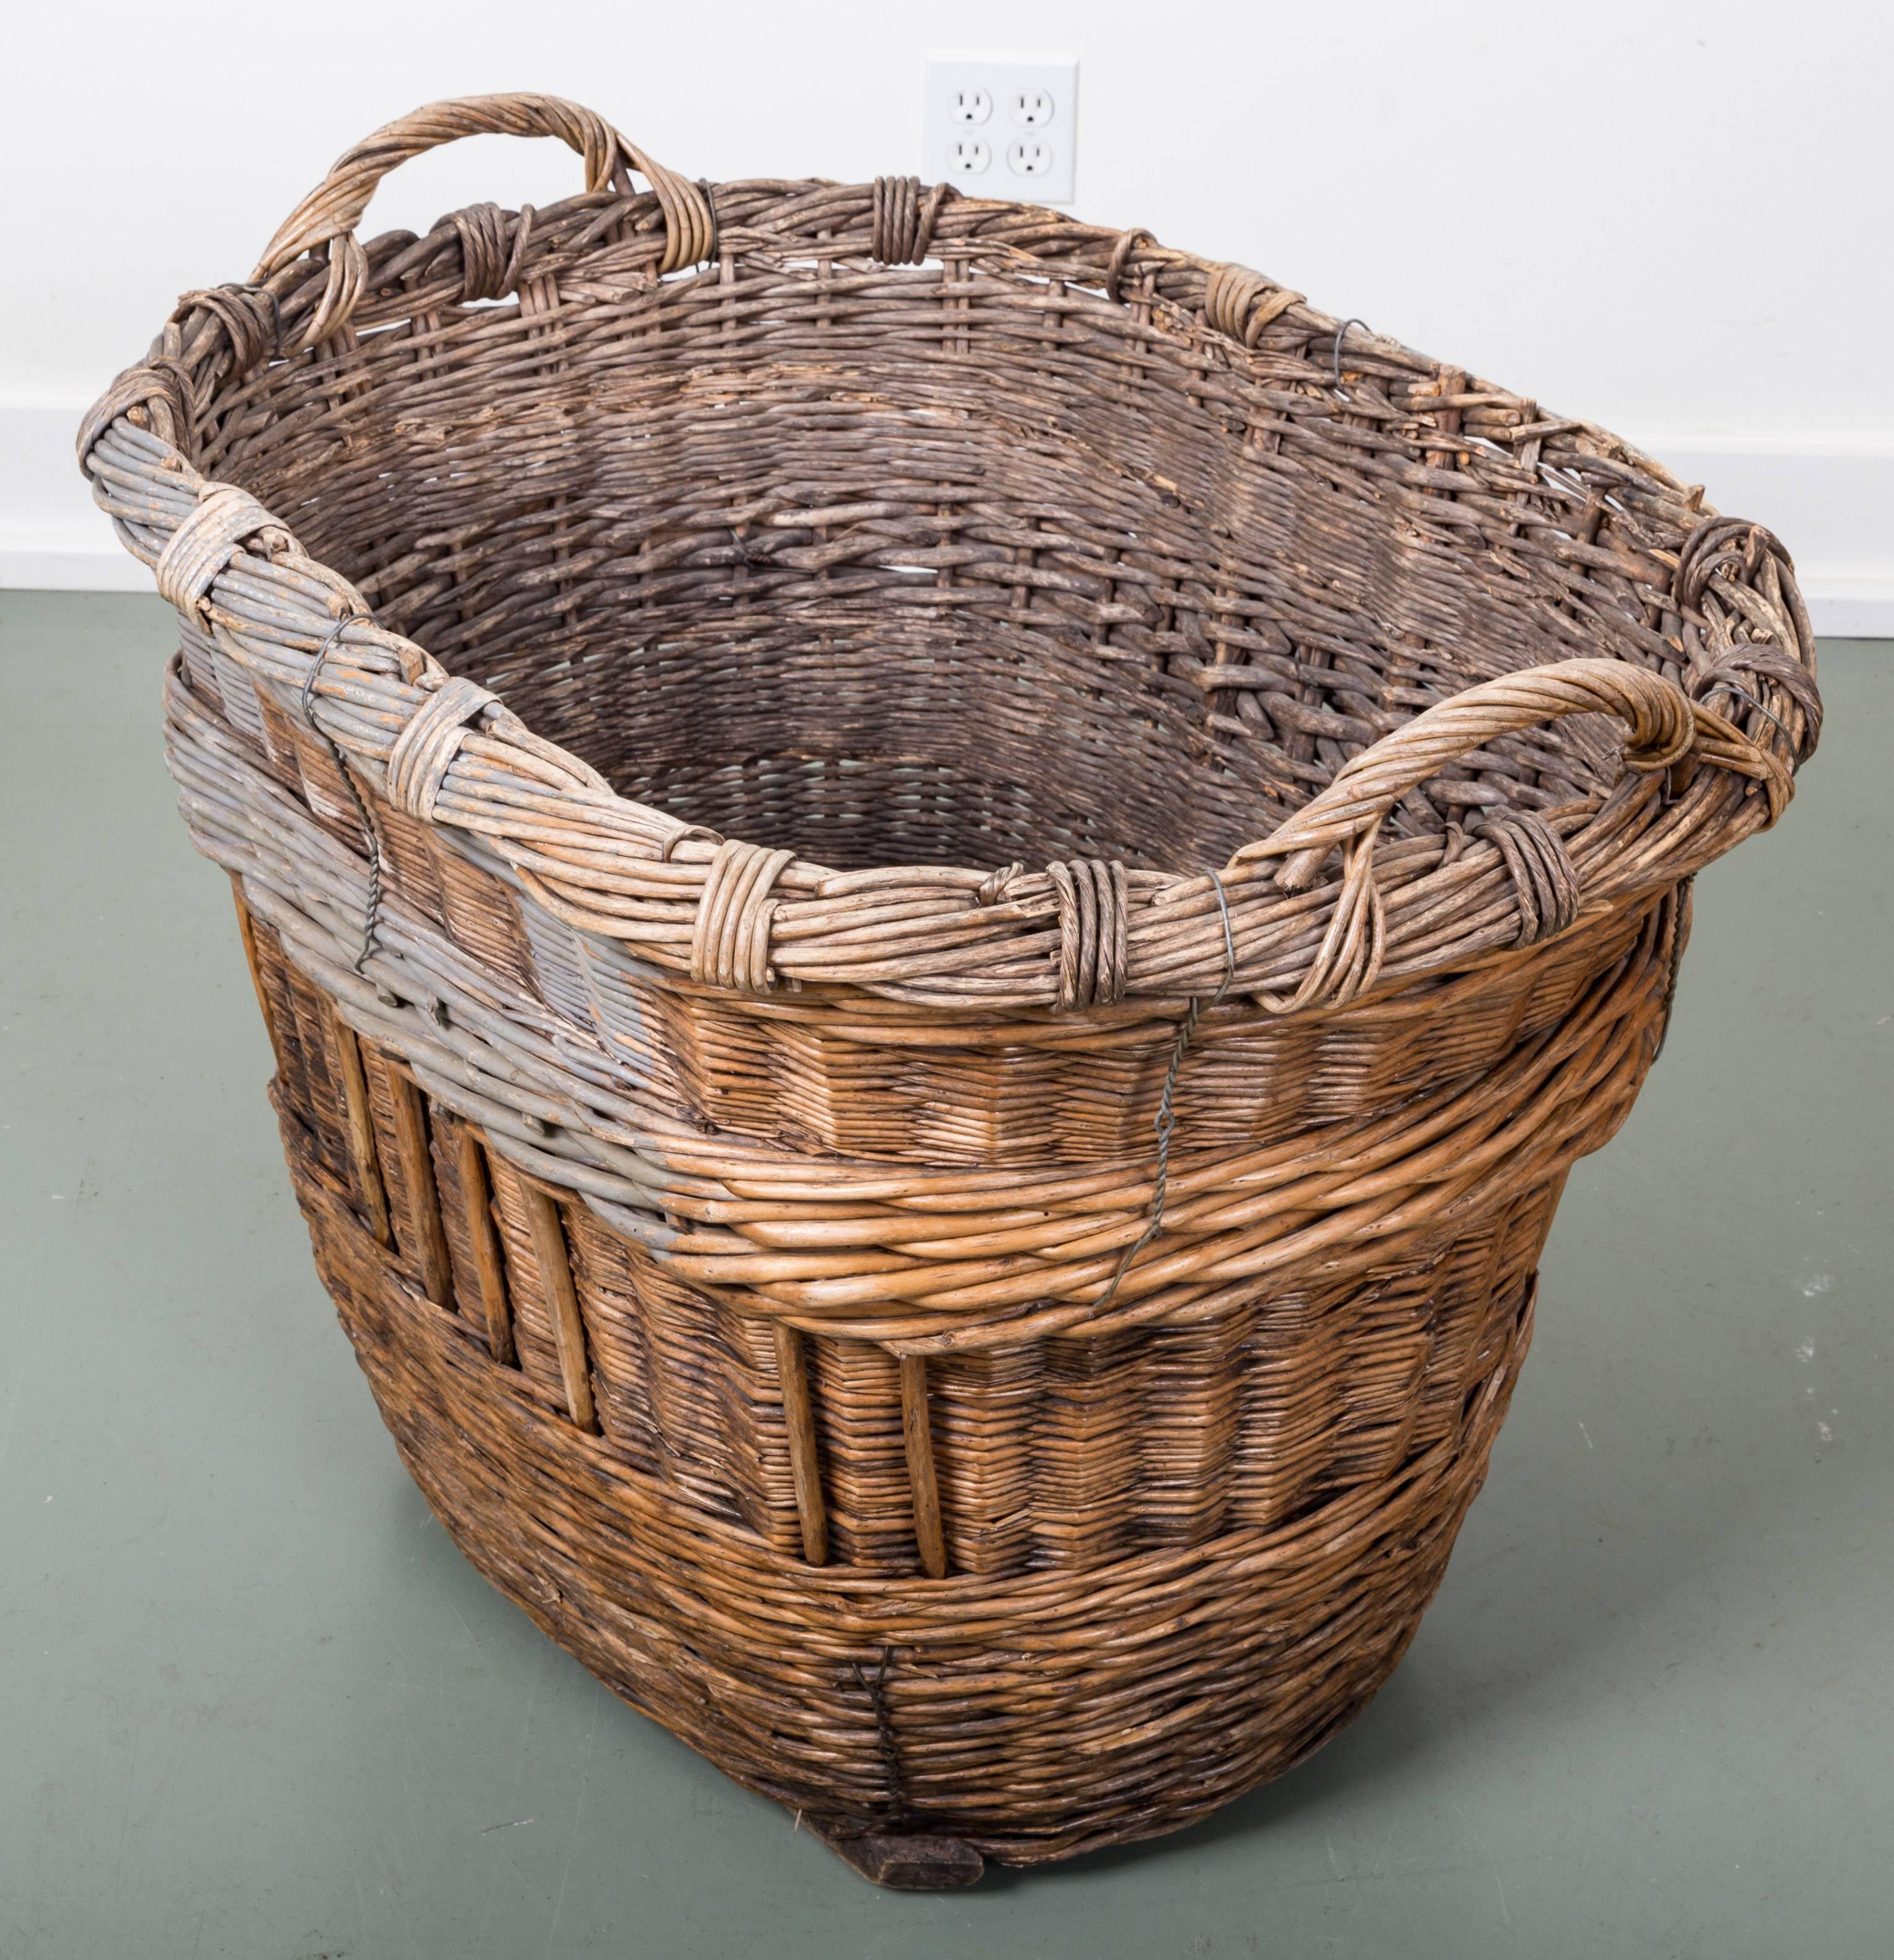 Antique French champagne harvest basket. Woven wicker with twisted wire supports. Two handles, wonderful patina to wicker with original paint color distinguishing vineyard; on two wooden runners. Place of origin Reims, France, circa 1910.